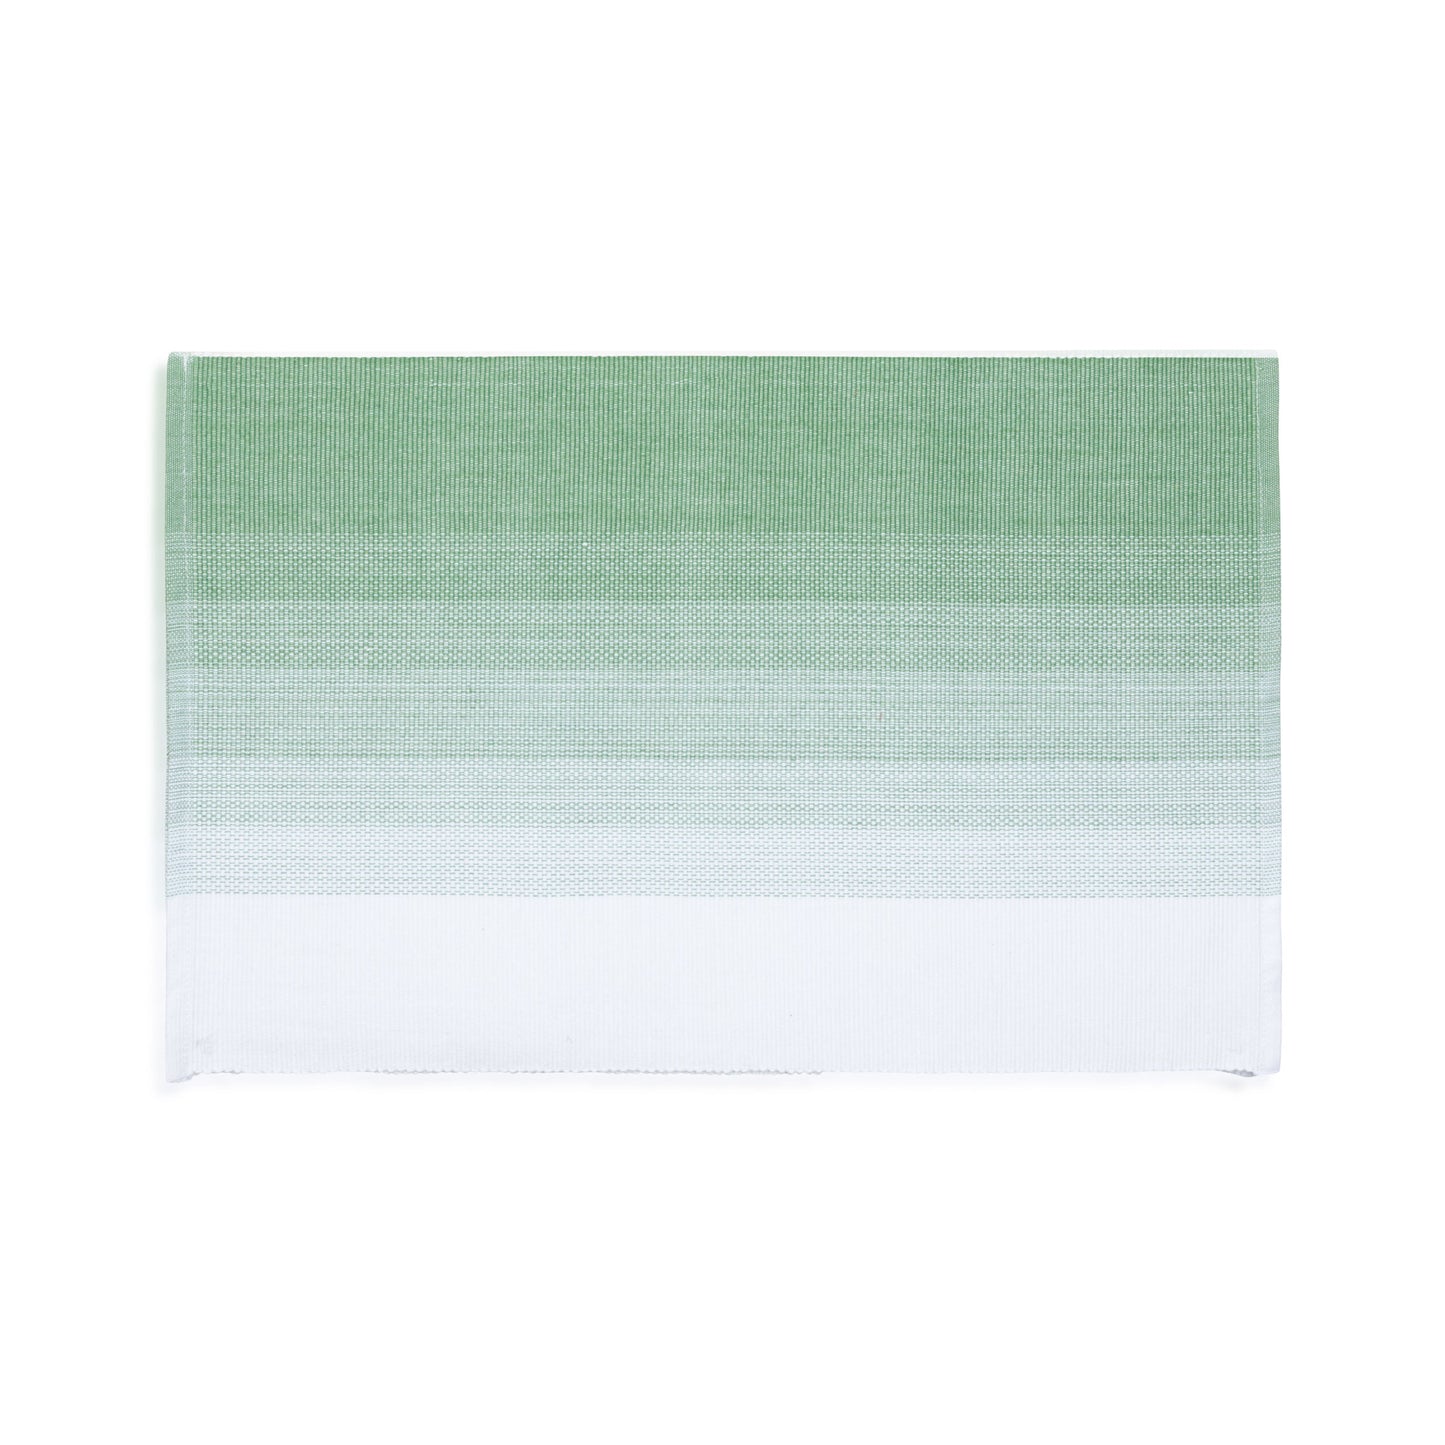 Green Ombre Woven Dining Room Table Placemat